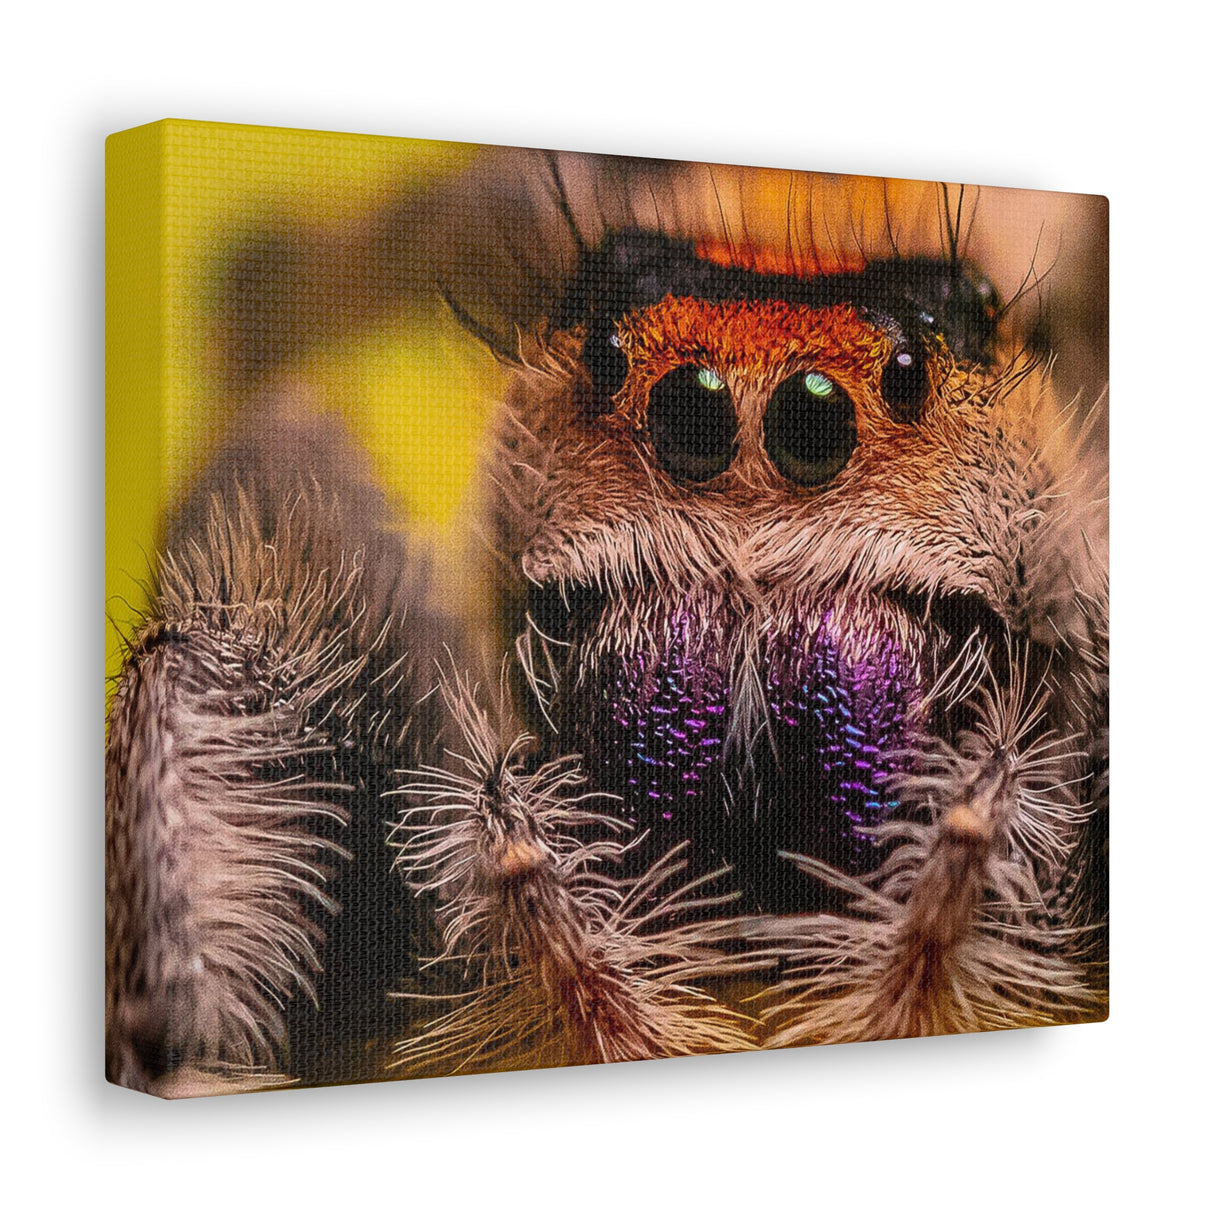 Jumping Spider Art printed on quality canvas wrap.